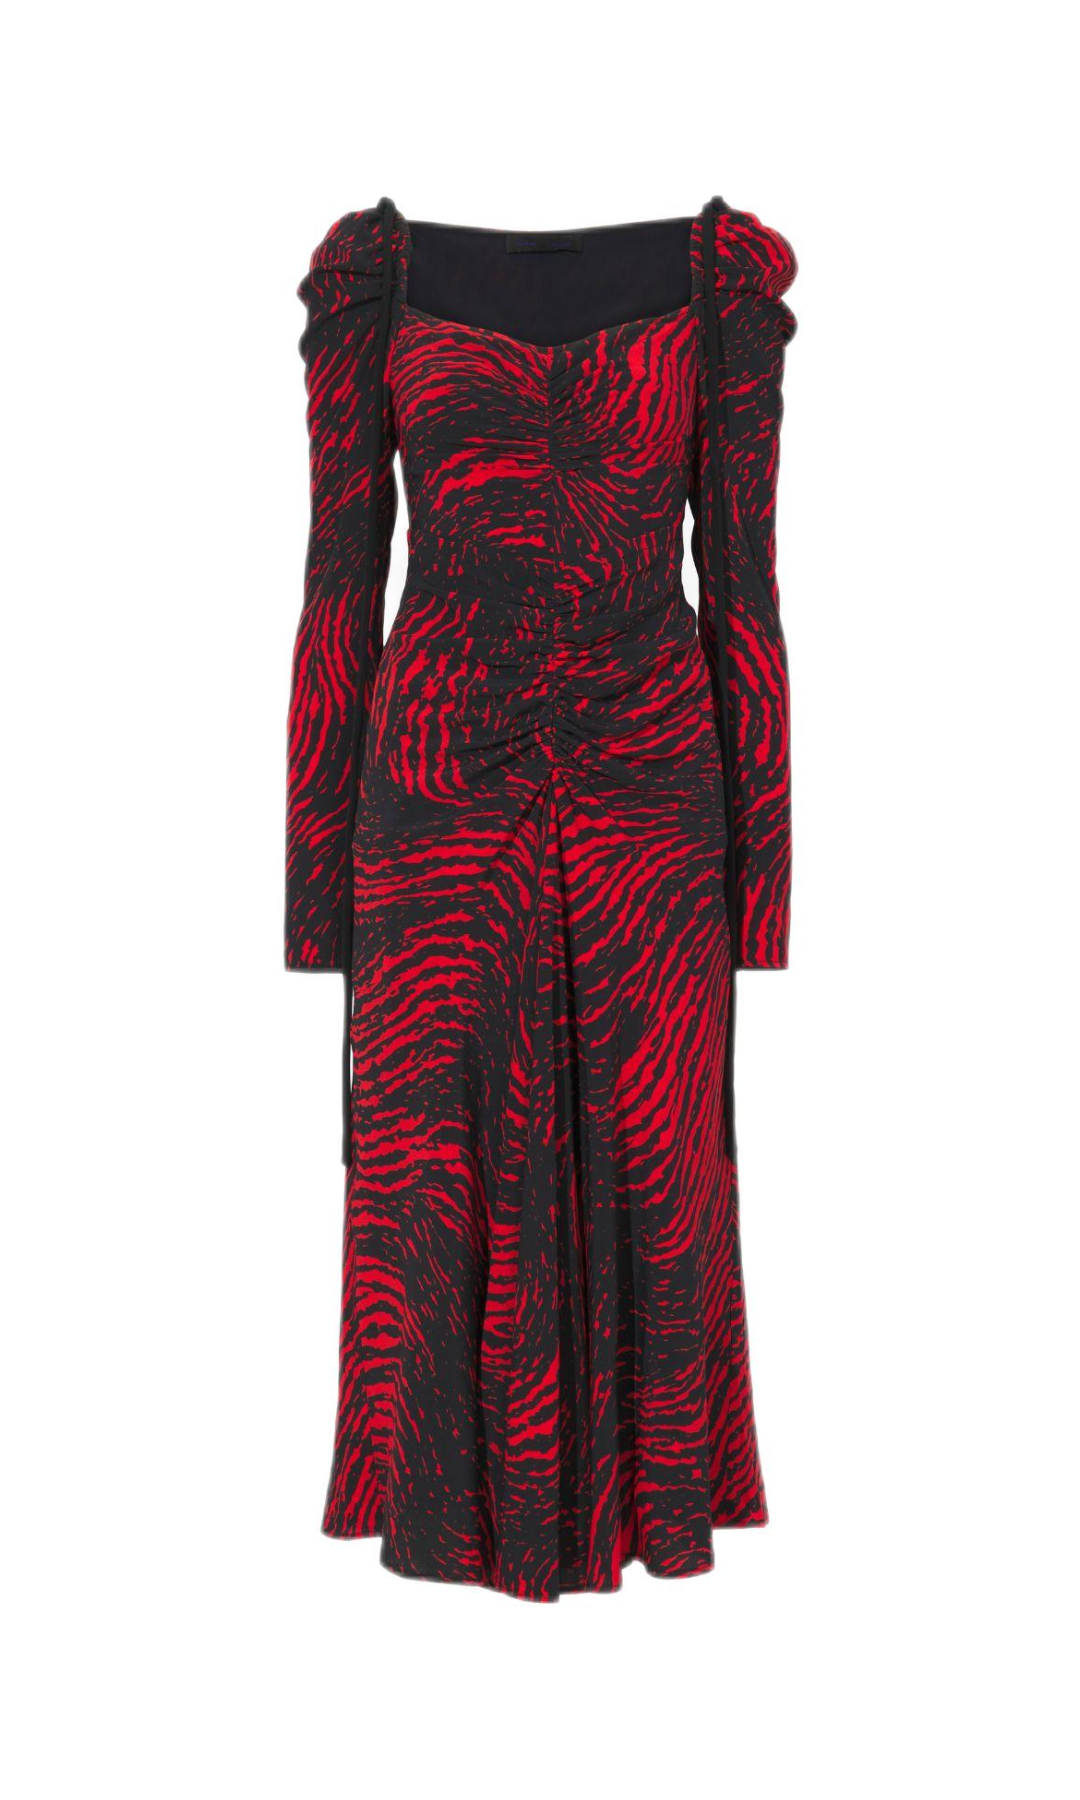 PAINTED SPIRAL CREPE DE CHINE CINCHED DRESS